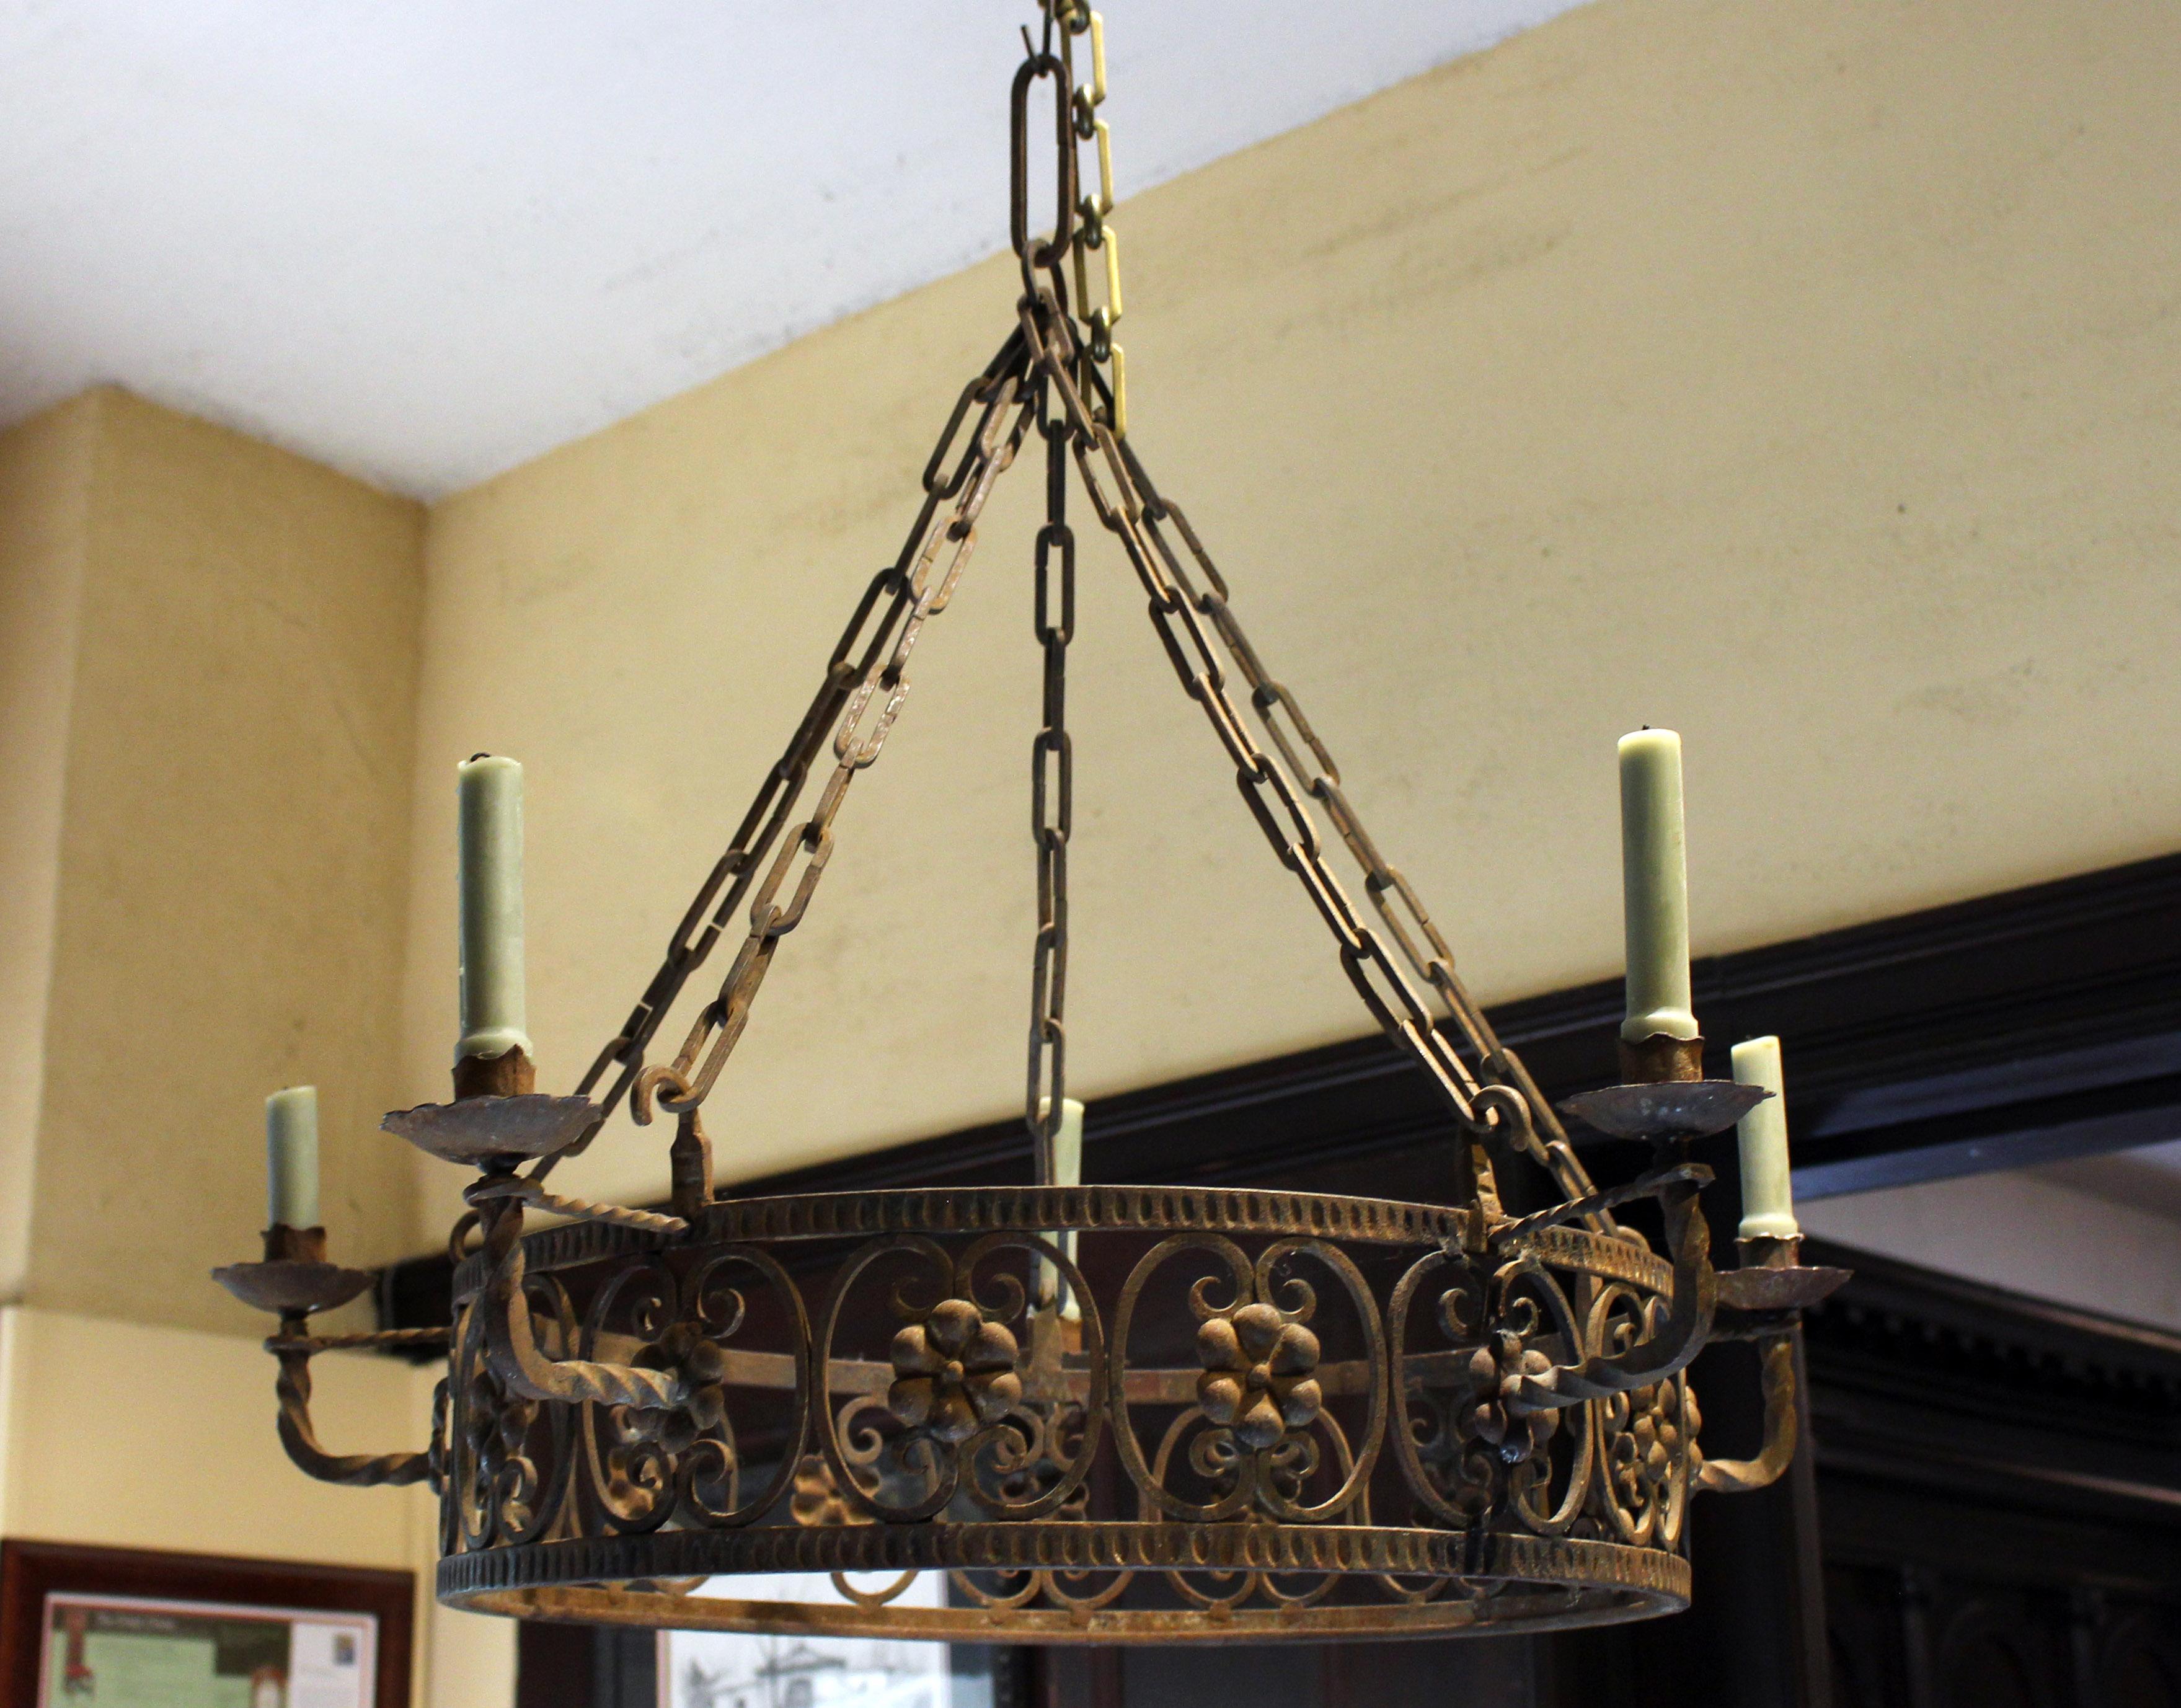 Early 20th century wrought iron 5-candle chandelier, French or Italian. Never electrified. Floral cast brosses entwined in reverse c-scrolls. Provenance: Estate of Katharine Reid, Cleveland Art Museum former director, purchased from Summerland, CA